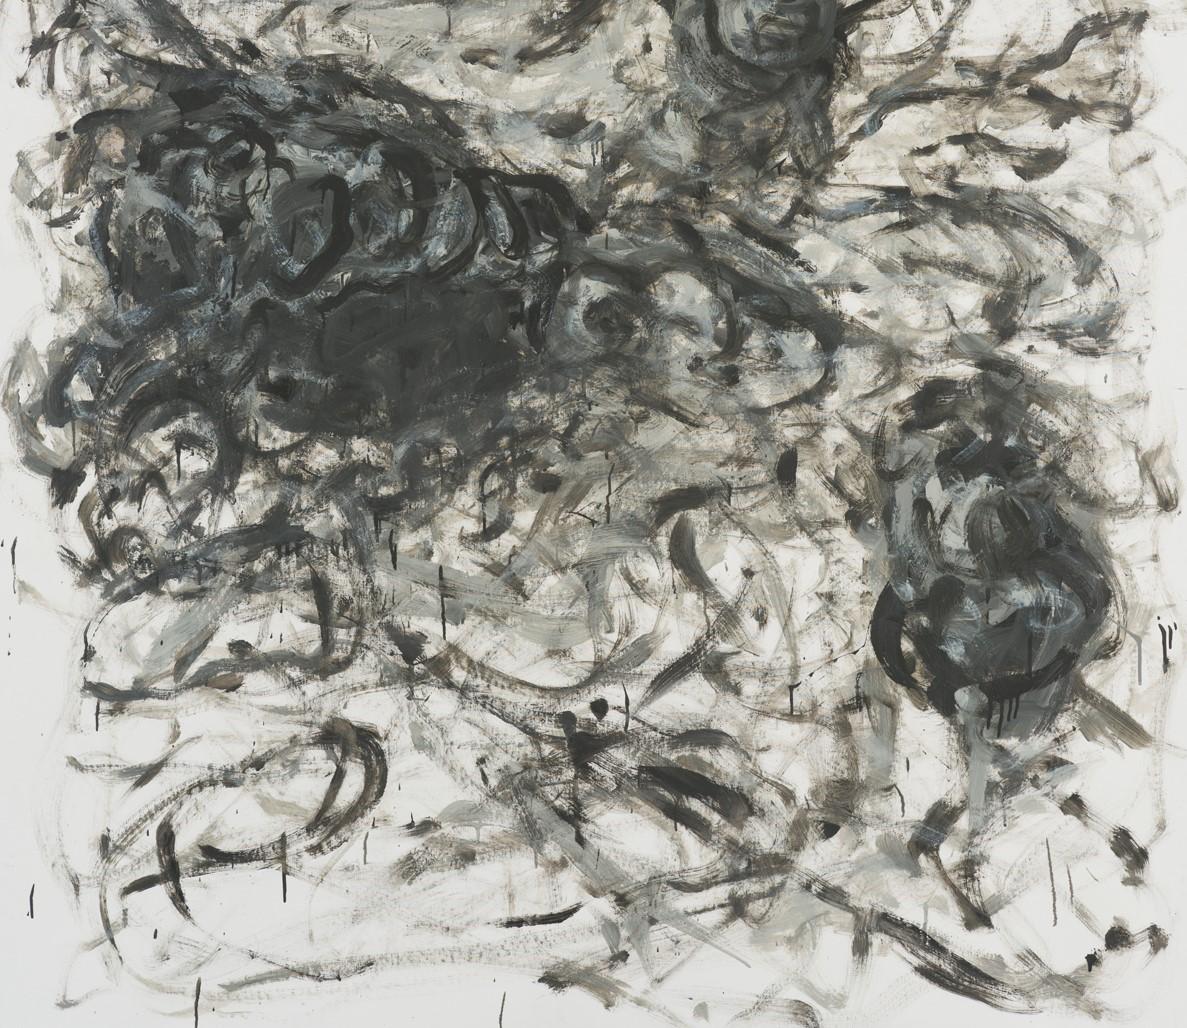 Untitled 01 [Remains of the Remains 01], 2018
oil on canvas
78 47/64 H x 59 1/16 W in
200 H x 150 W cm

The large-sized paintings, signed by Zsolt Berszán, addresses the subject of death in terms of the remains of decaying bodies. The surface of the